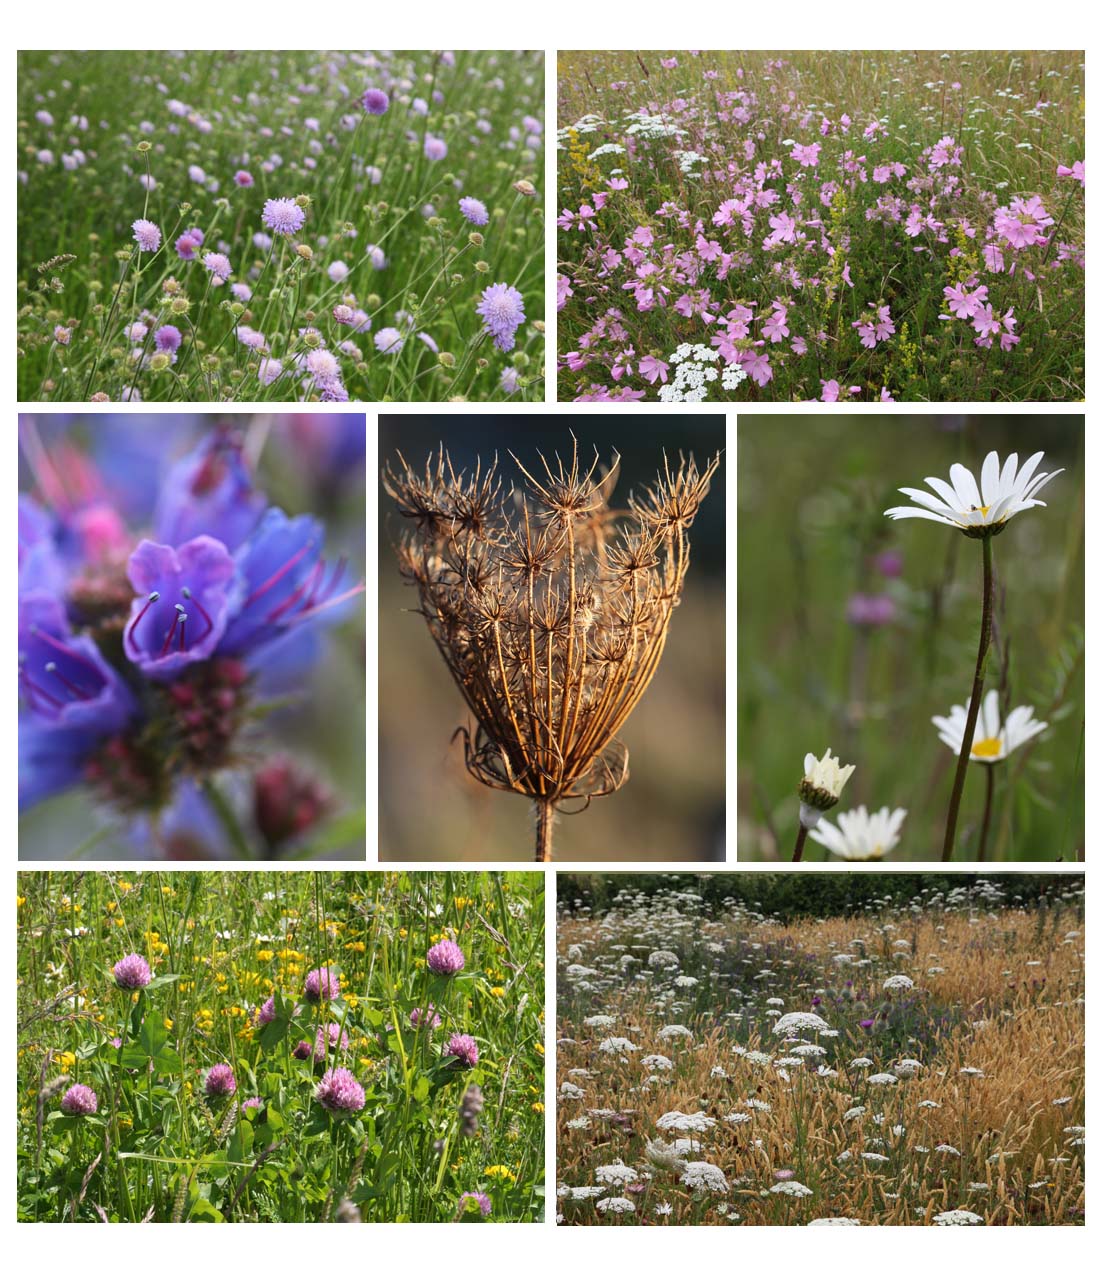 Meadow plants (top) field scabious, musk mallow and yarrow, (mid) flower of viper's bugloss, mature carrot umbel, oxeye daisy, (bottom left ) red clover and bird's food trefoil and (bottom right) wild carrot and sweet vernal grass sown in another part of the garden (Living Field collection)